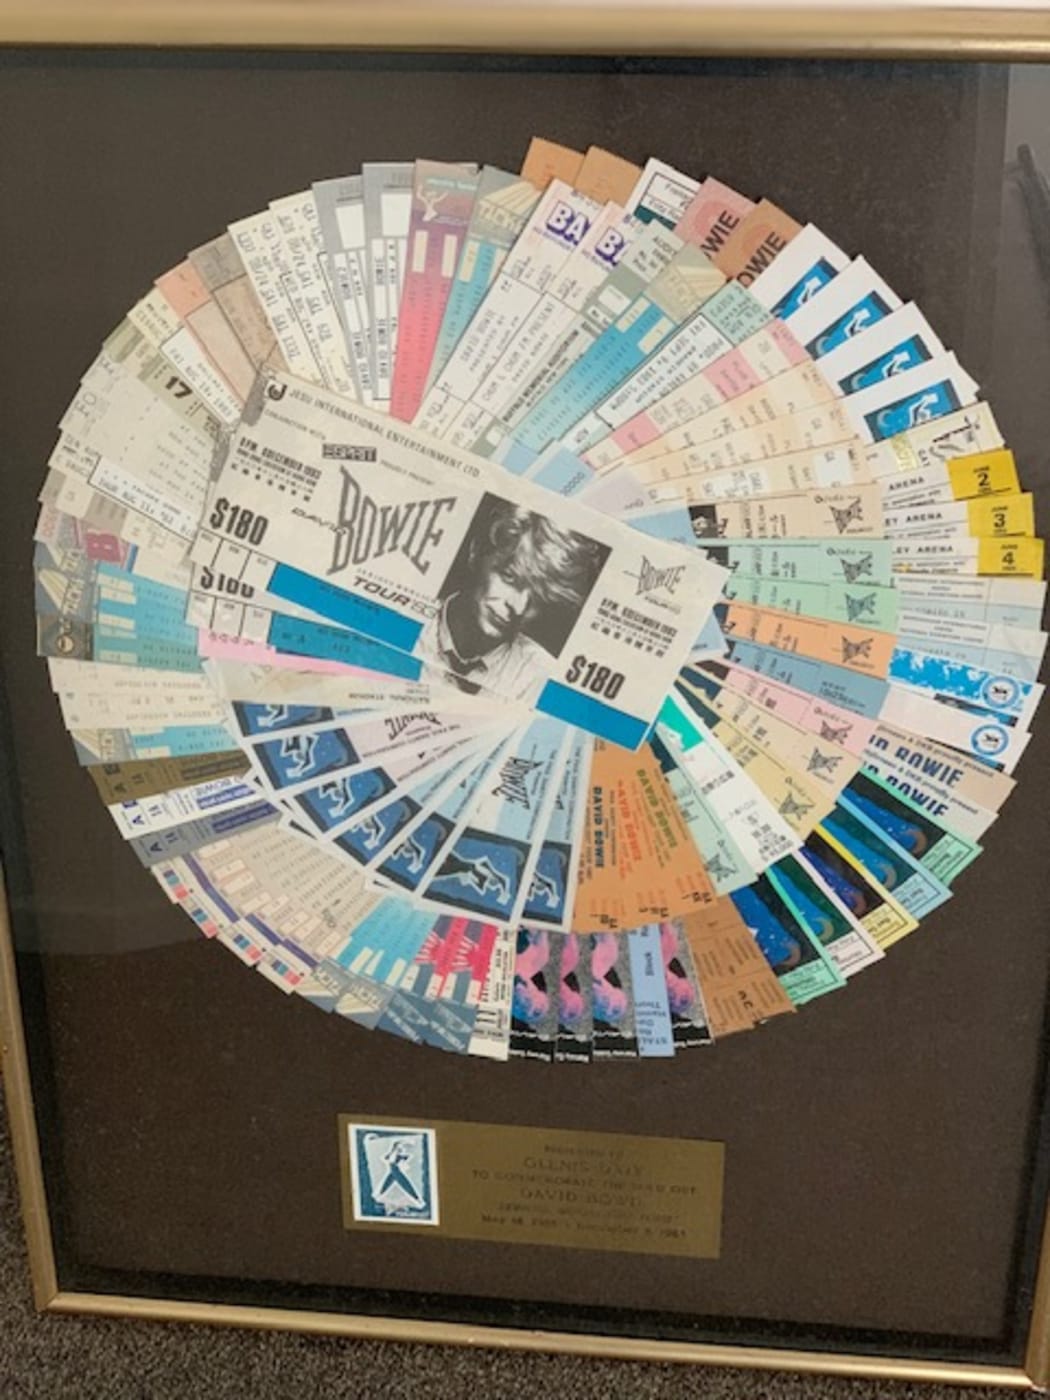 Glenis Daly's collection of tickets from the Serious Moonlight tour.